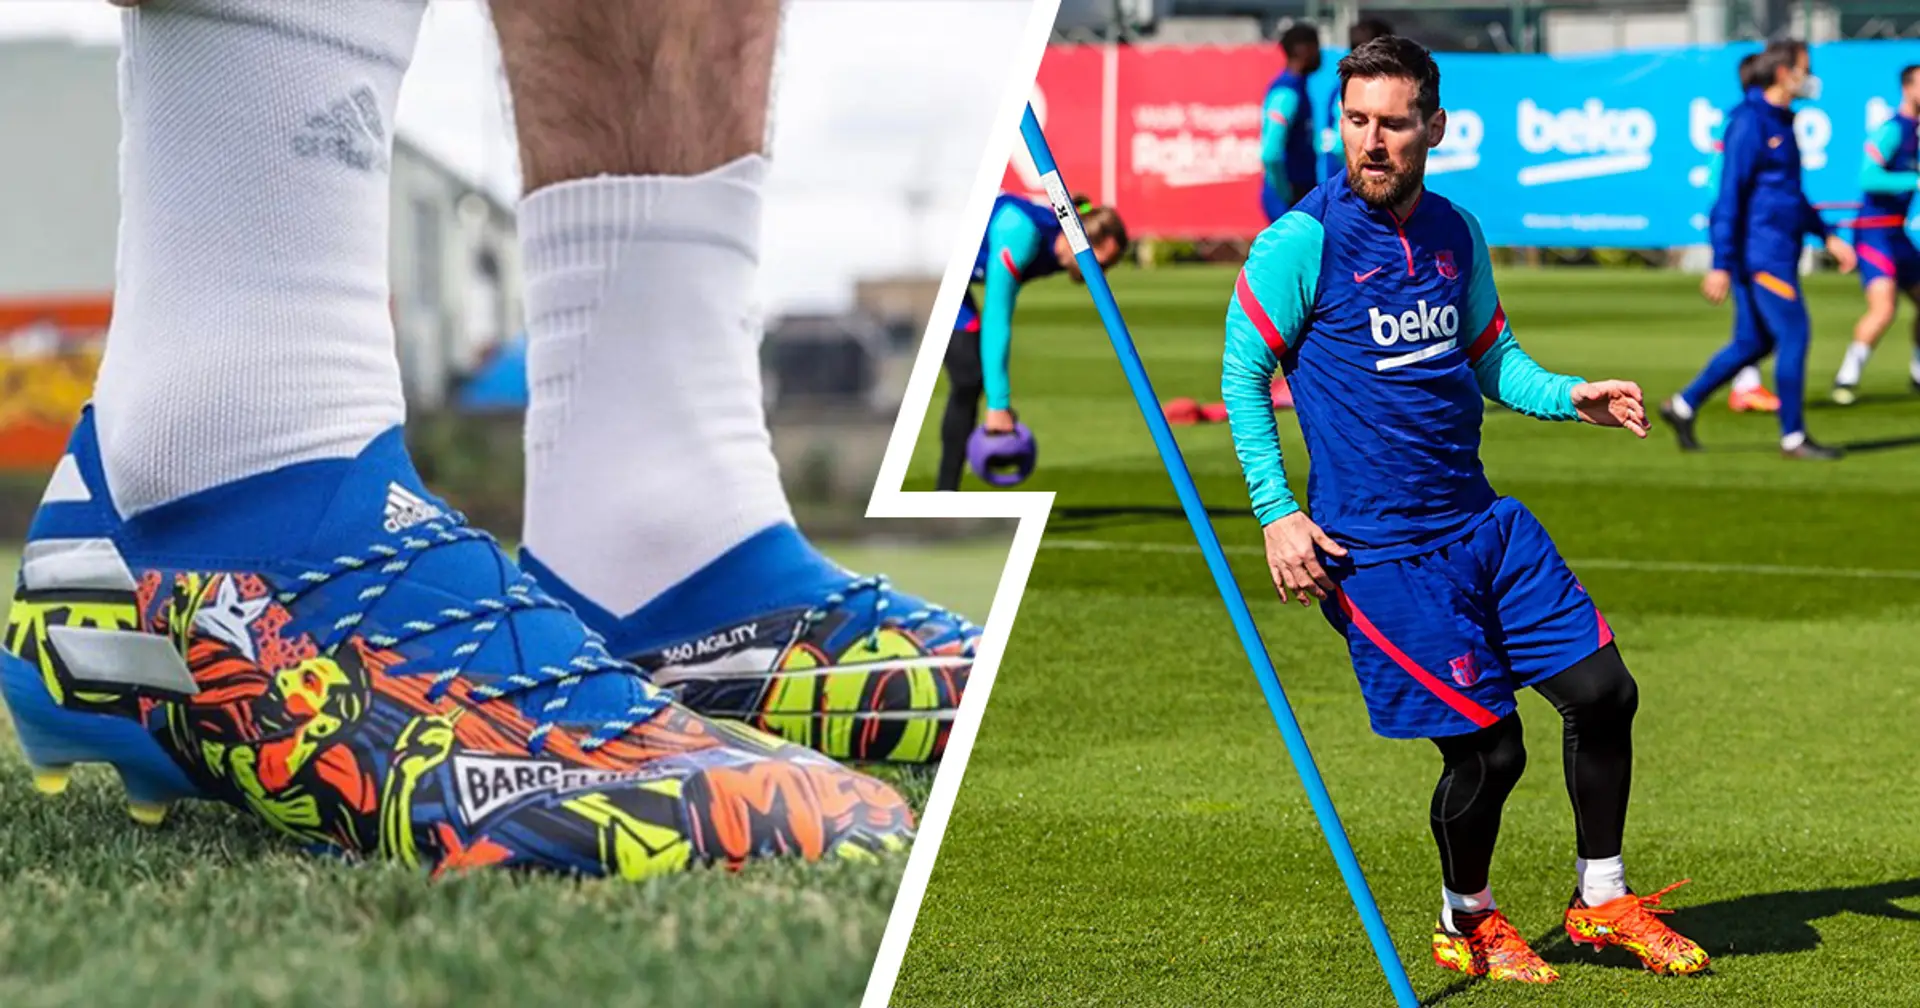 Messi shows brand Adidas in 2020/21 price, design and other things to know - Football | Tribuna.com